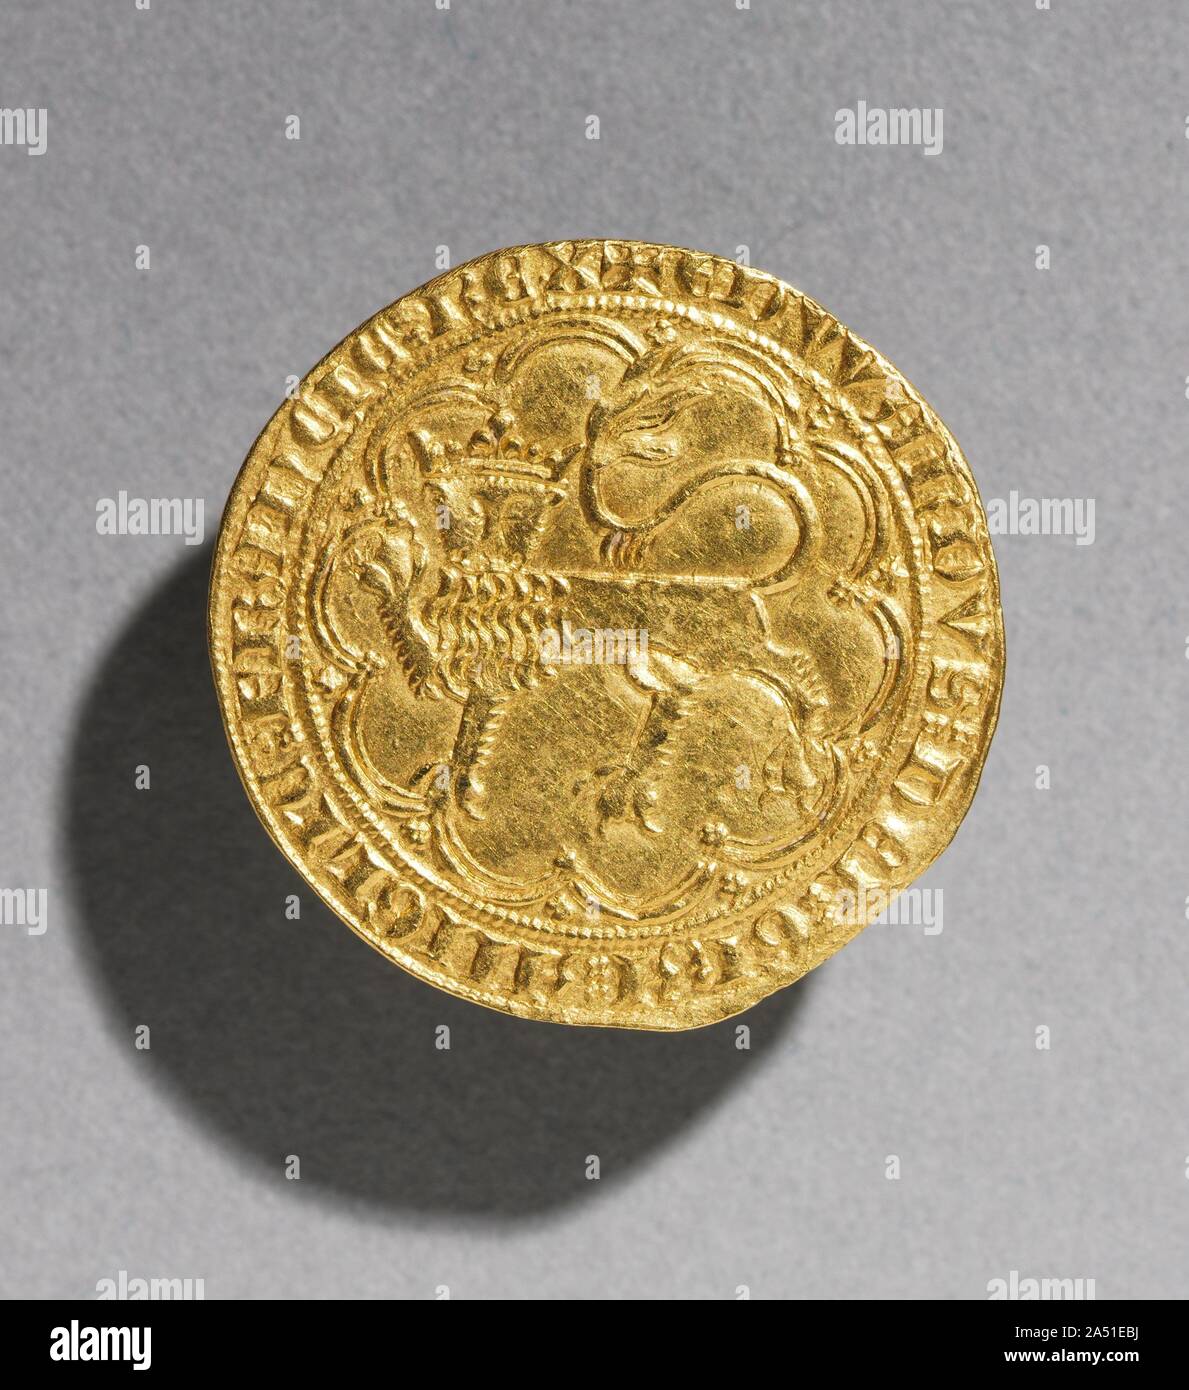 Leopard dOr of Edward III of England , 1327-1377. Known as a &quot;Golden  Leopard&quot; because of the crowned leopard on one side, this gold coin  was minted for Edward III, king of